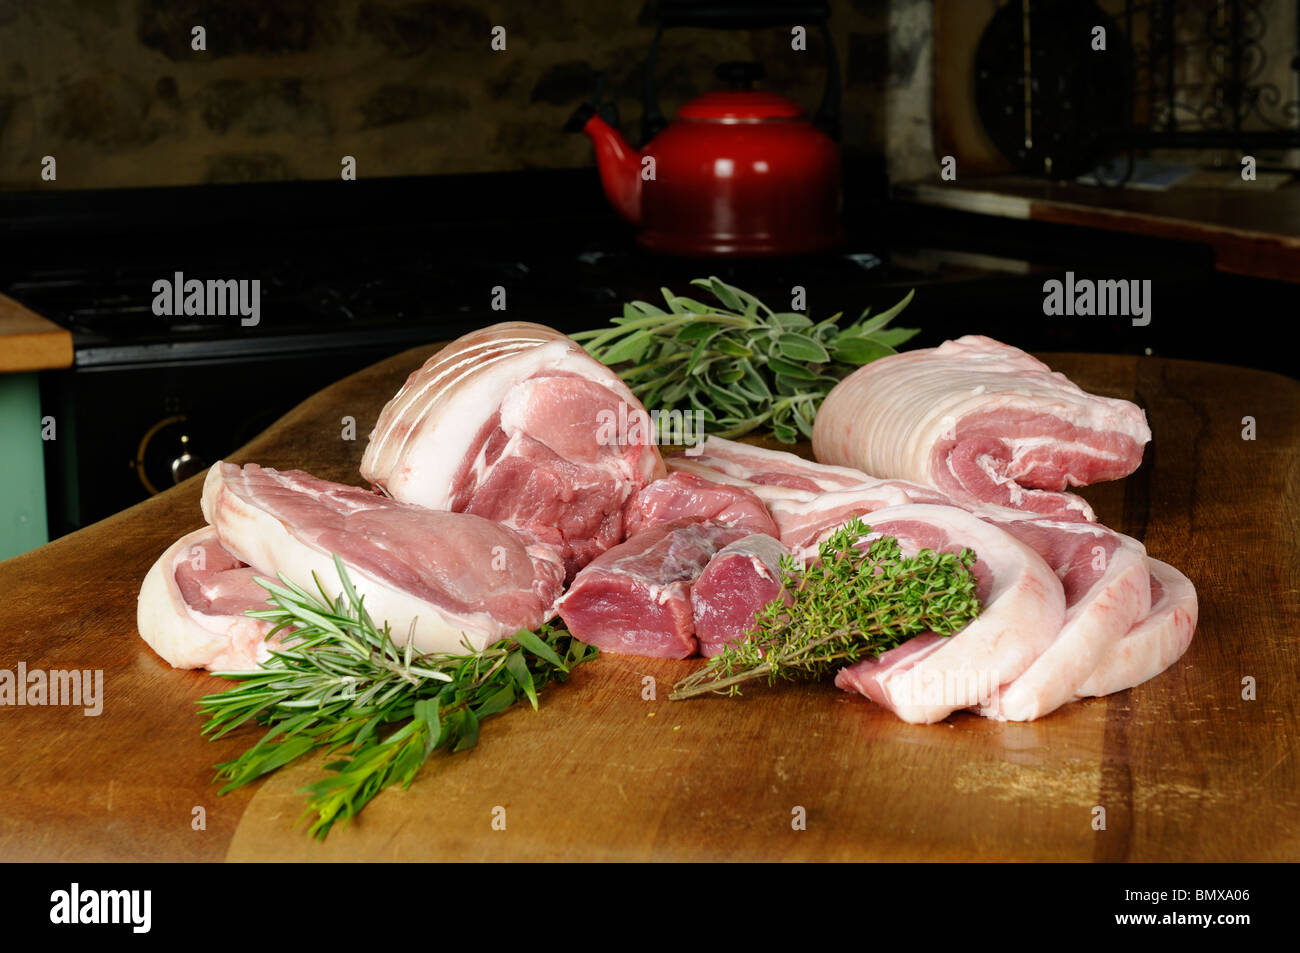 Stock photo of a selection of raw pork products on a wooden kitchen table. Stock Photo